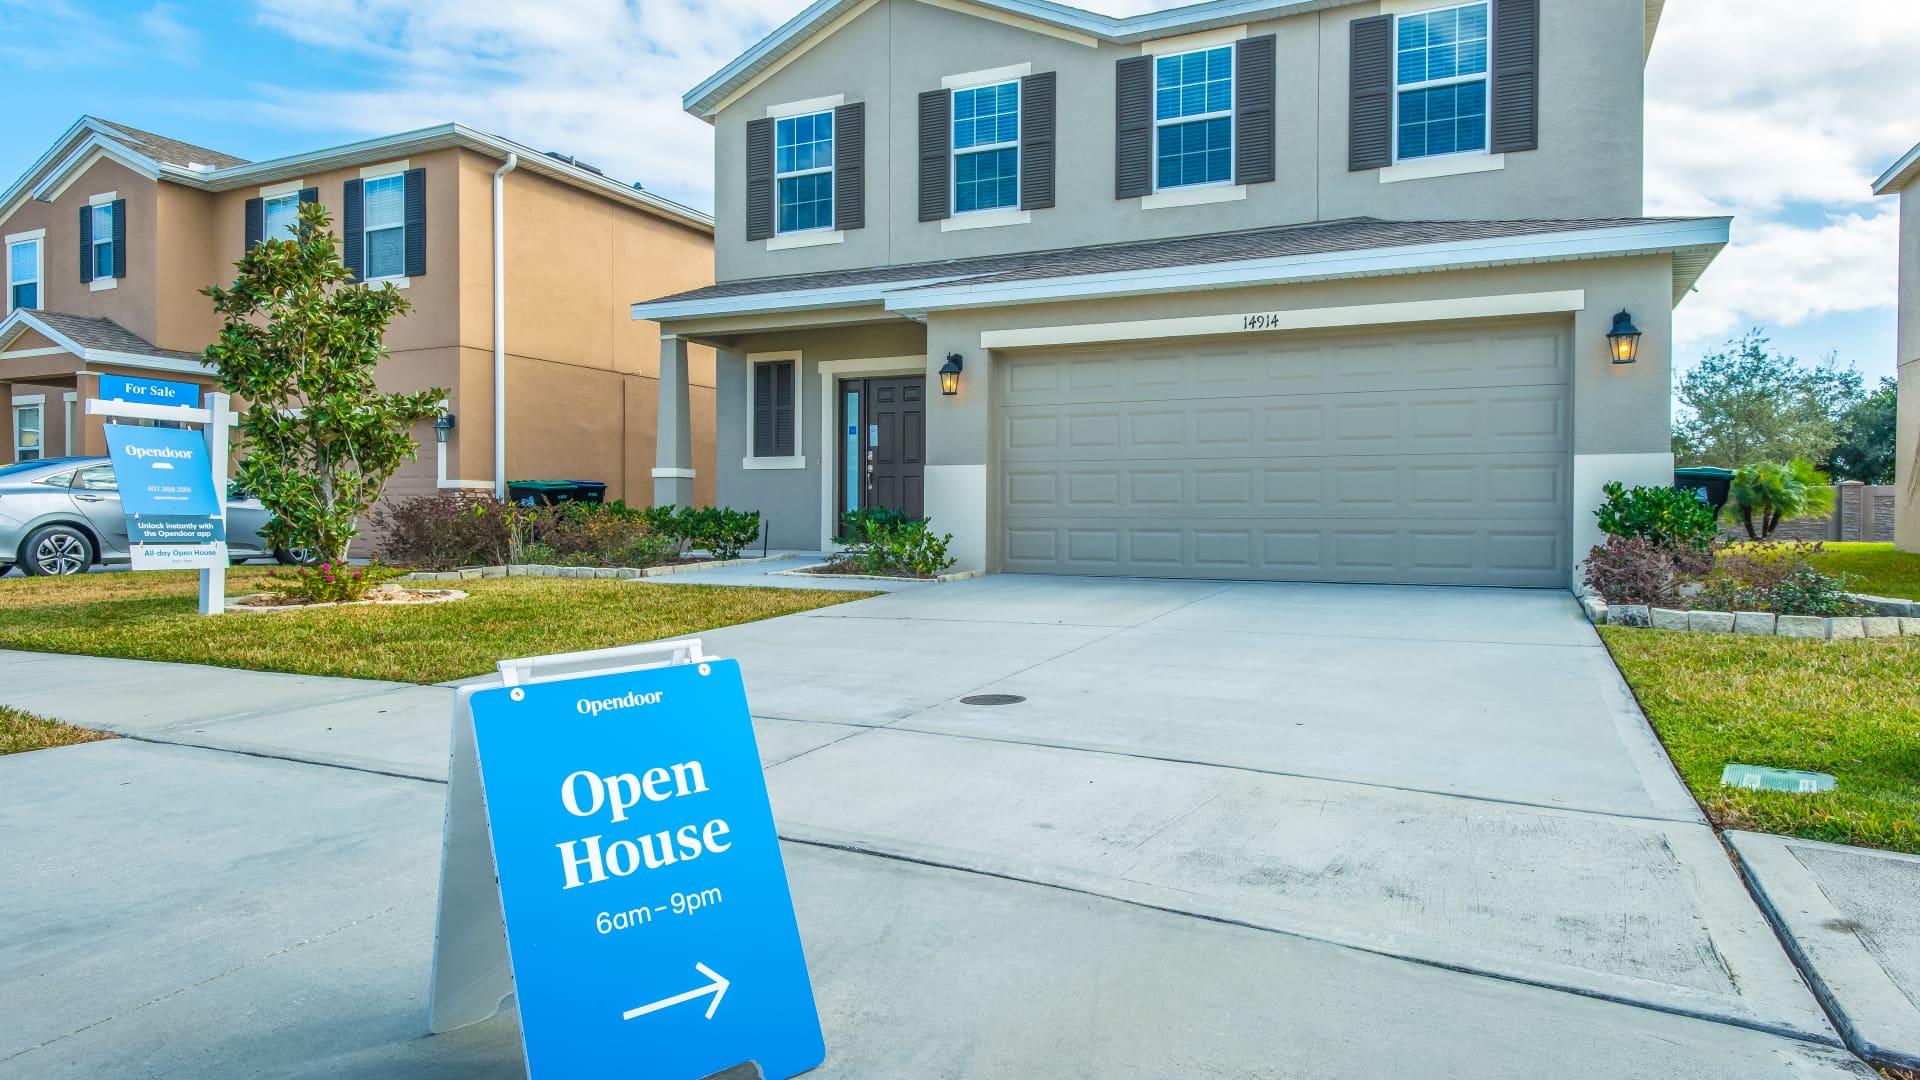 OpenDoor is disrupting the real estate market with its new model. It buys homes and sells them on its platform.